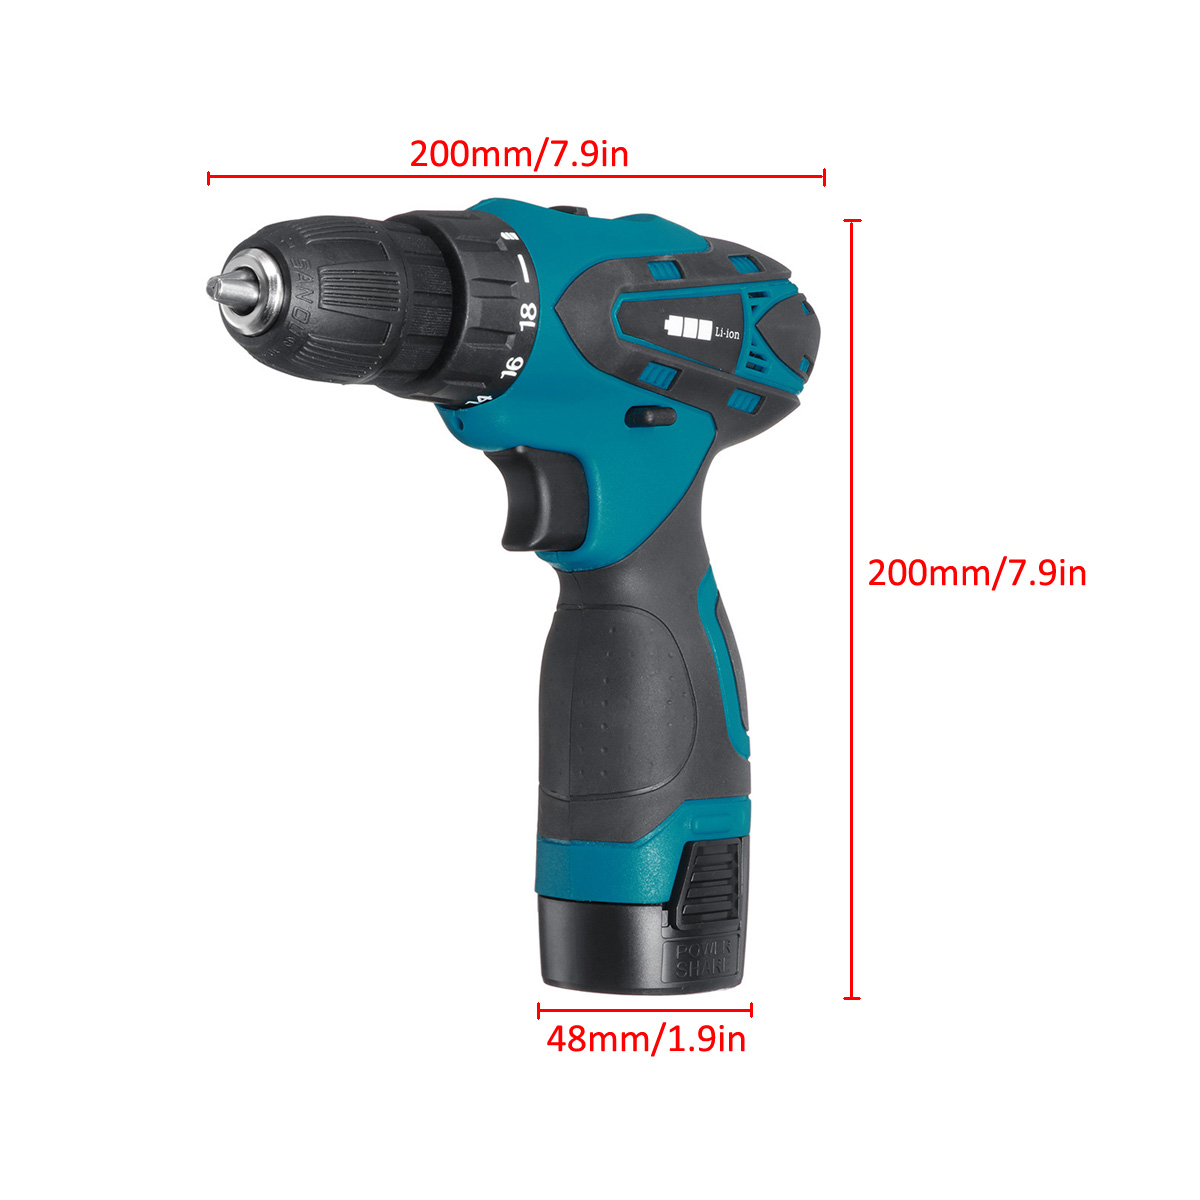 168V-Cordless-Electric-Drill-Driver-231-Torque-Multifuntional-Screwdriver-Power-Tool-W-Battery--Dril-1863336-6